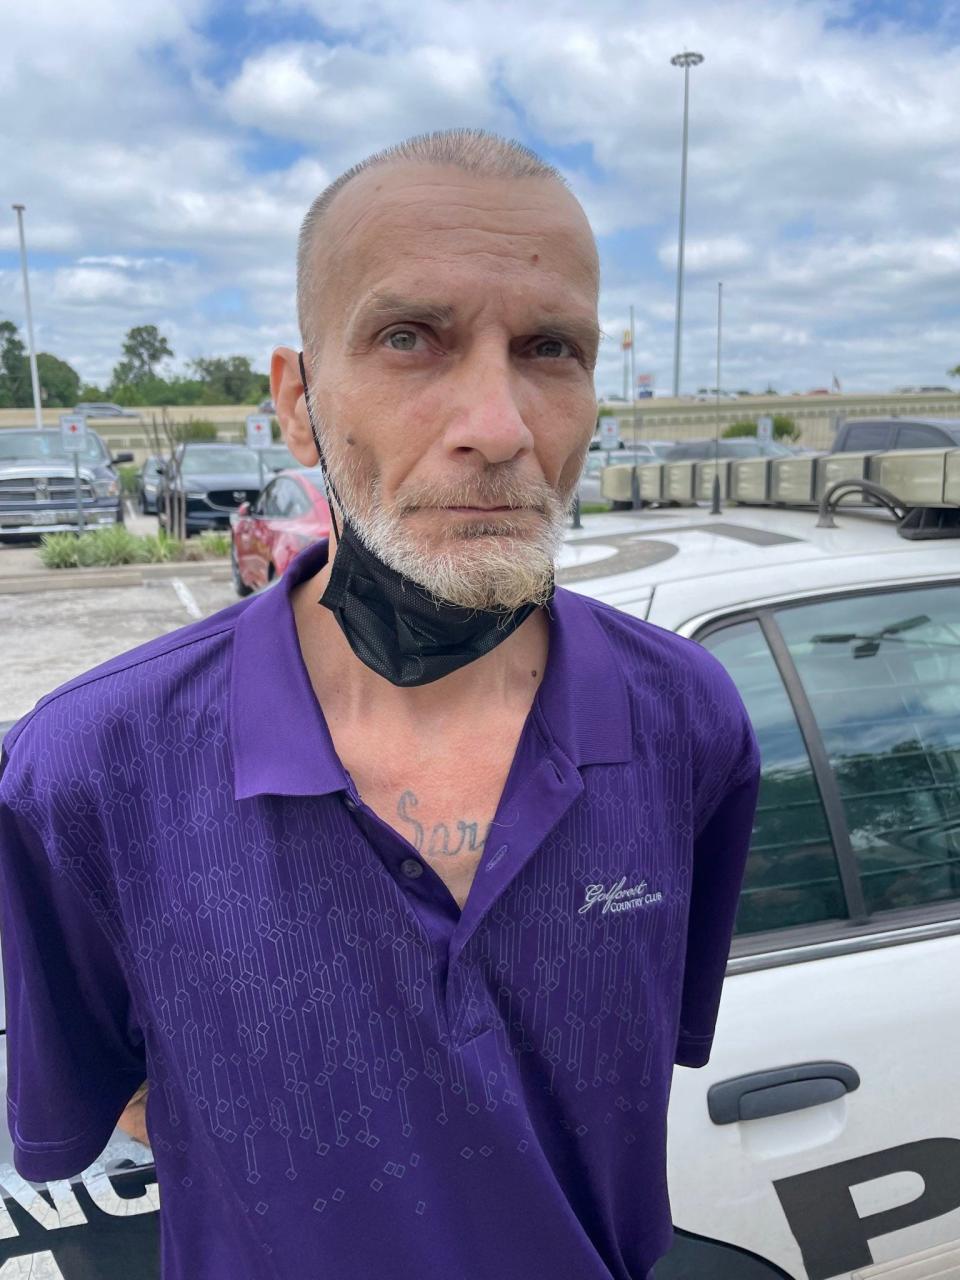 Jerry Raynes was apprehended in Texas after he and three other inmates escaped on April 22, 2023 from the Raymond Detention Center near Jackson, Mississippi's capital, Hinds County Sheriff Tyree Jones said. One inmate died in a standoff with law enforcement shortly before Raynes capture.